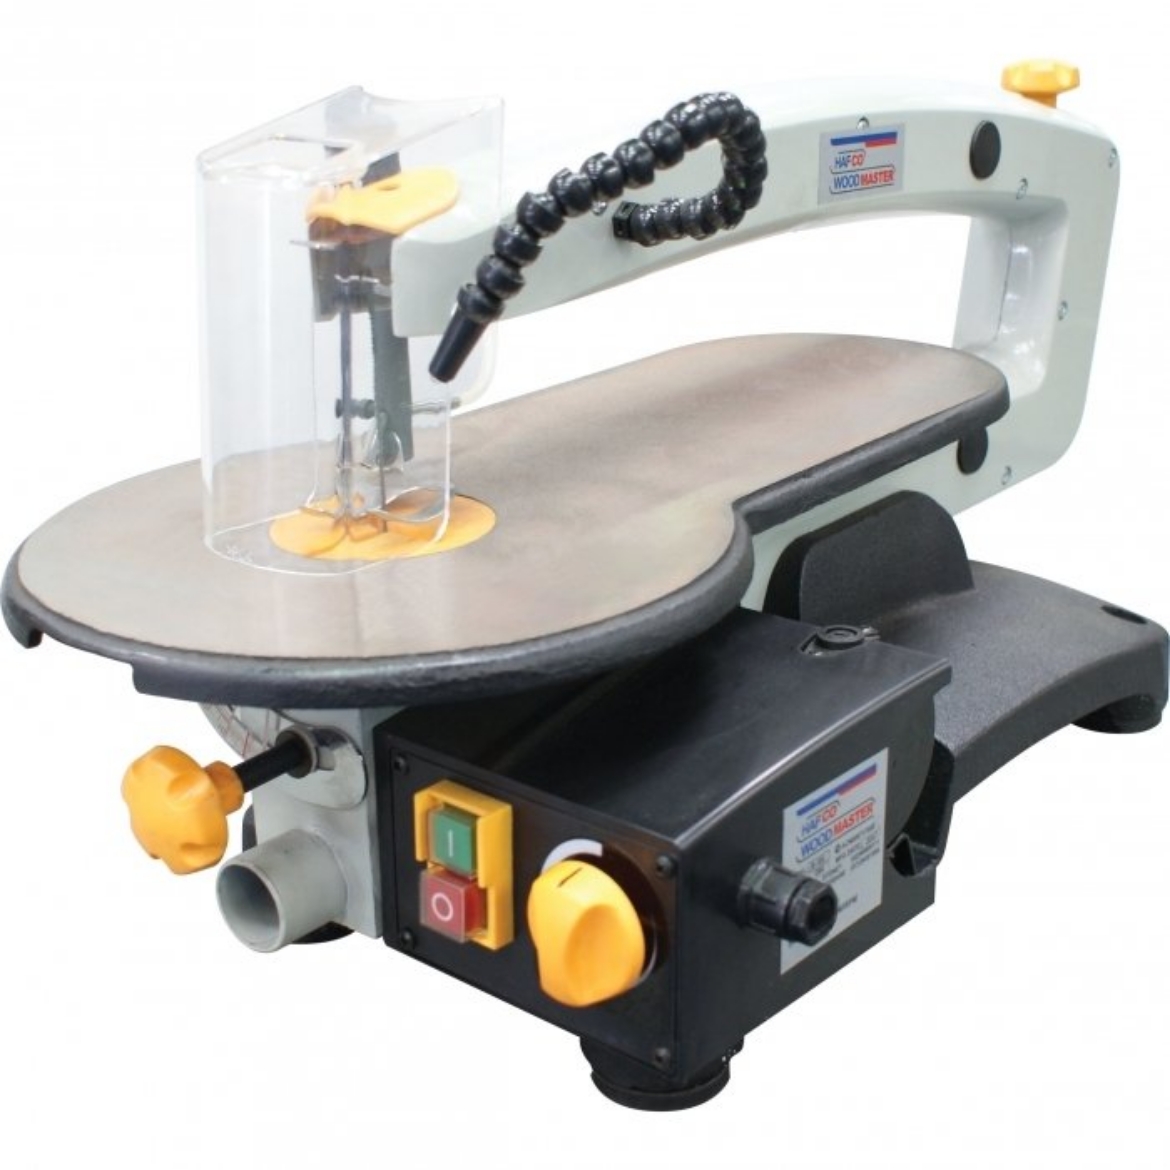 Picture of HAFCO WOODMASTER B-18V Variable Speed Scroll Saw 450mm (18") Throat Depth